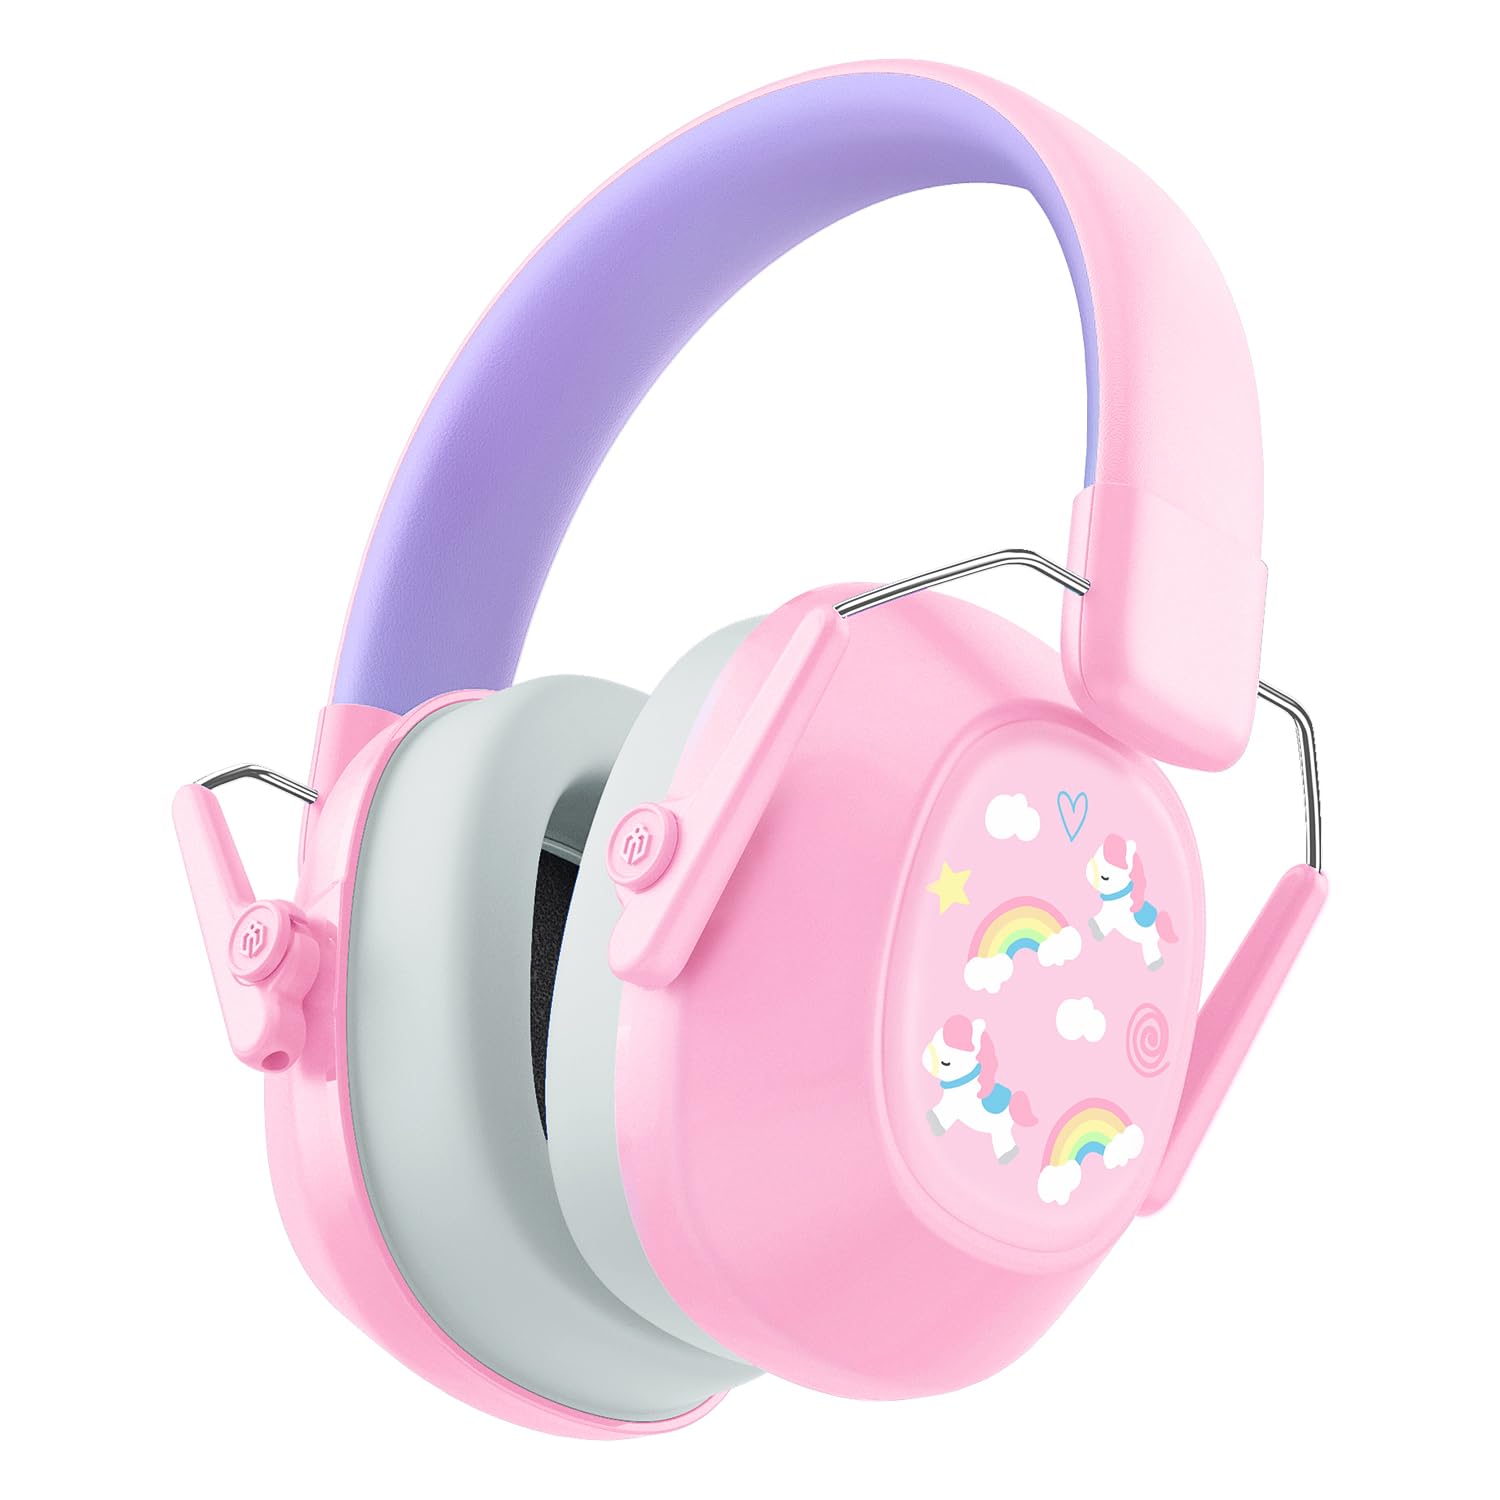 iClever Noise Cancelling Headphones for Kids, 26dB NRR Safety Noise Reduction Ear Muffs